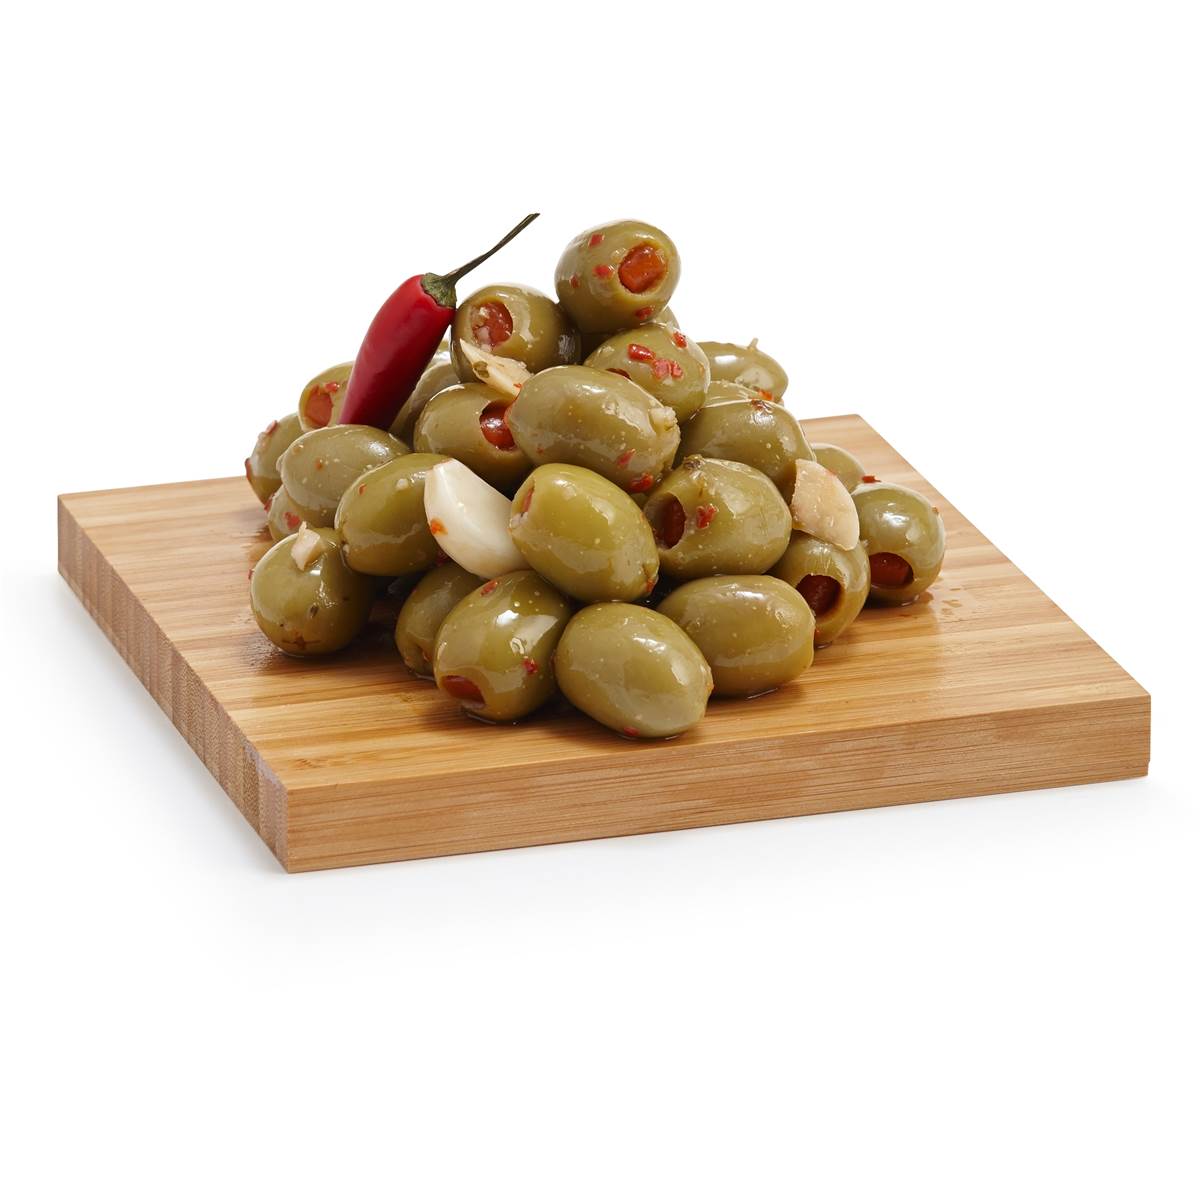 Calories in Woolworths Olives Green Stuffed Chilli Garlic